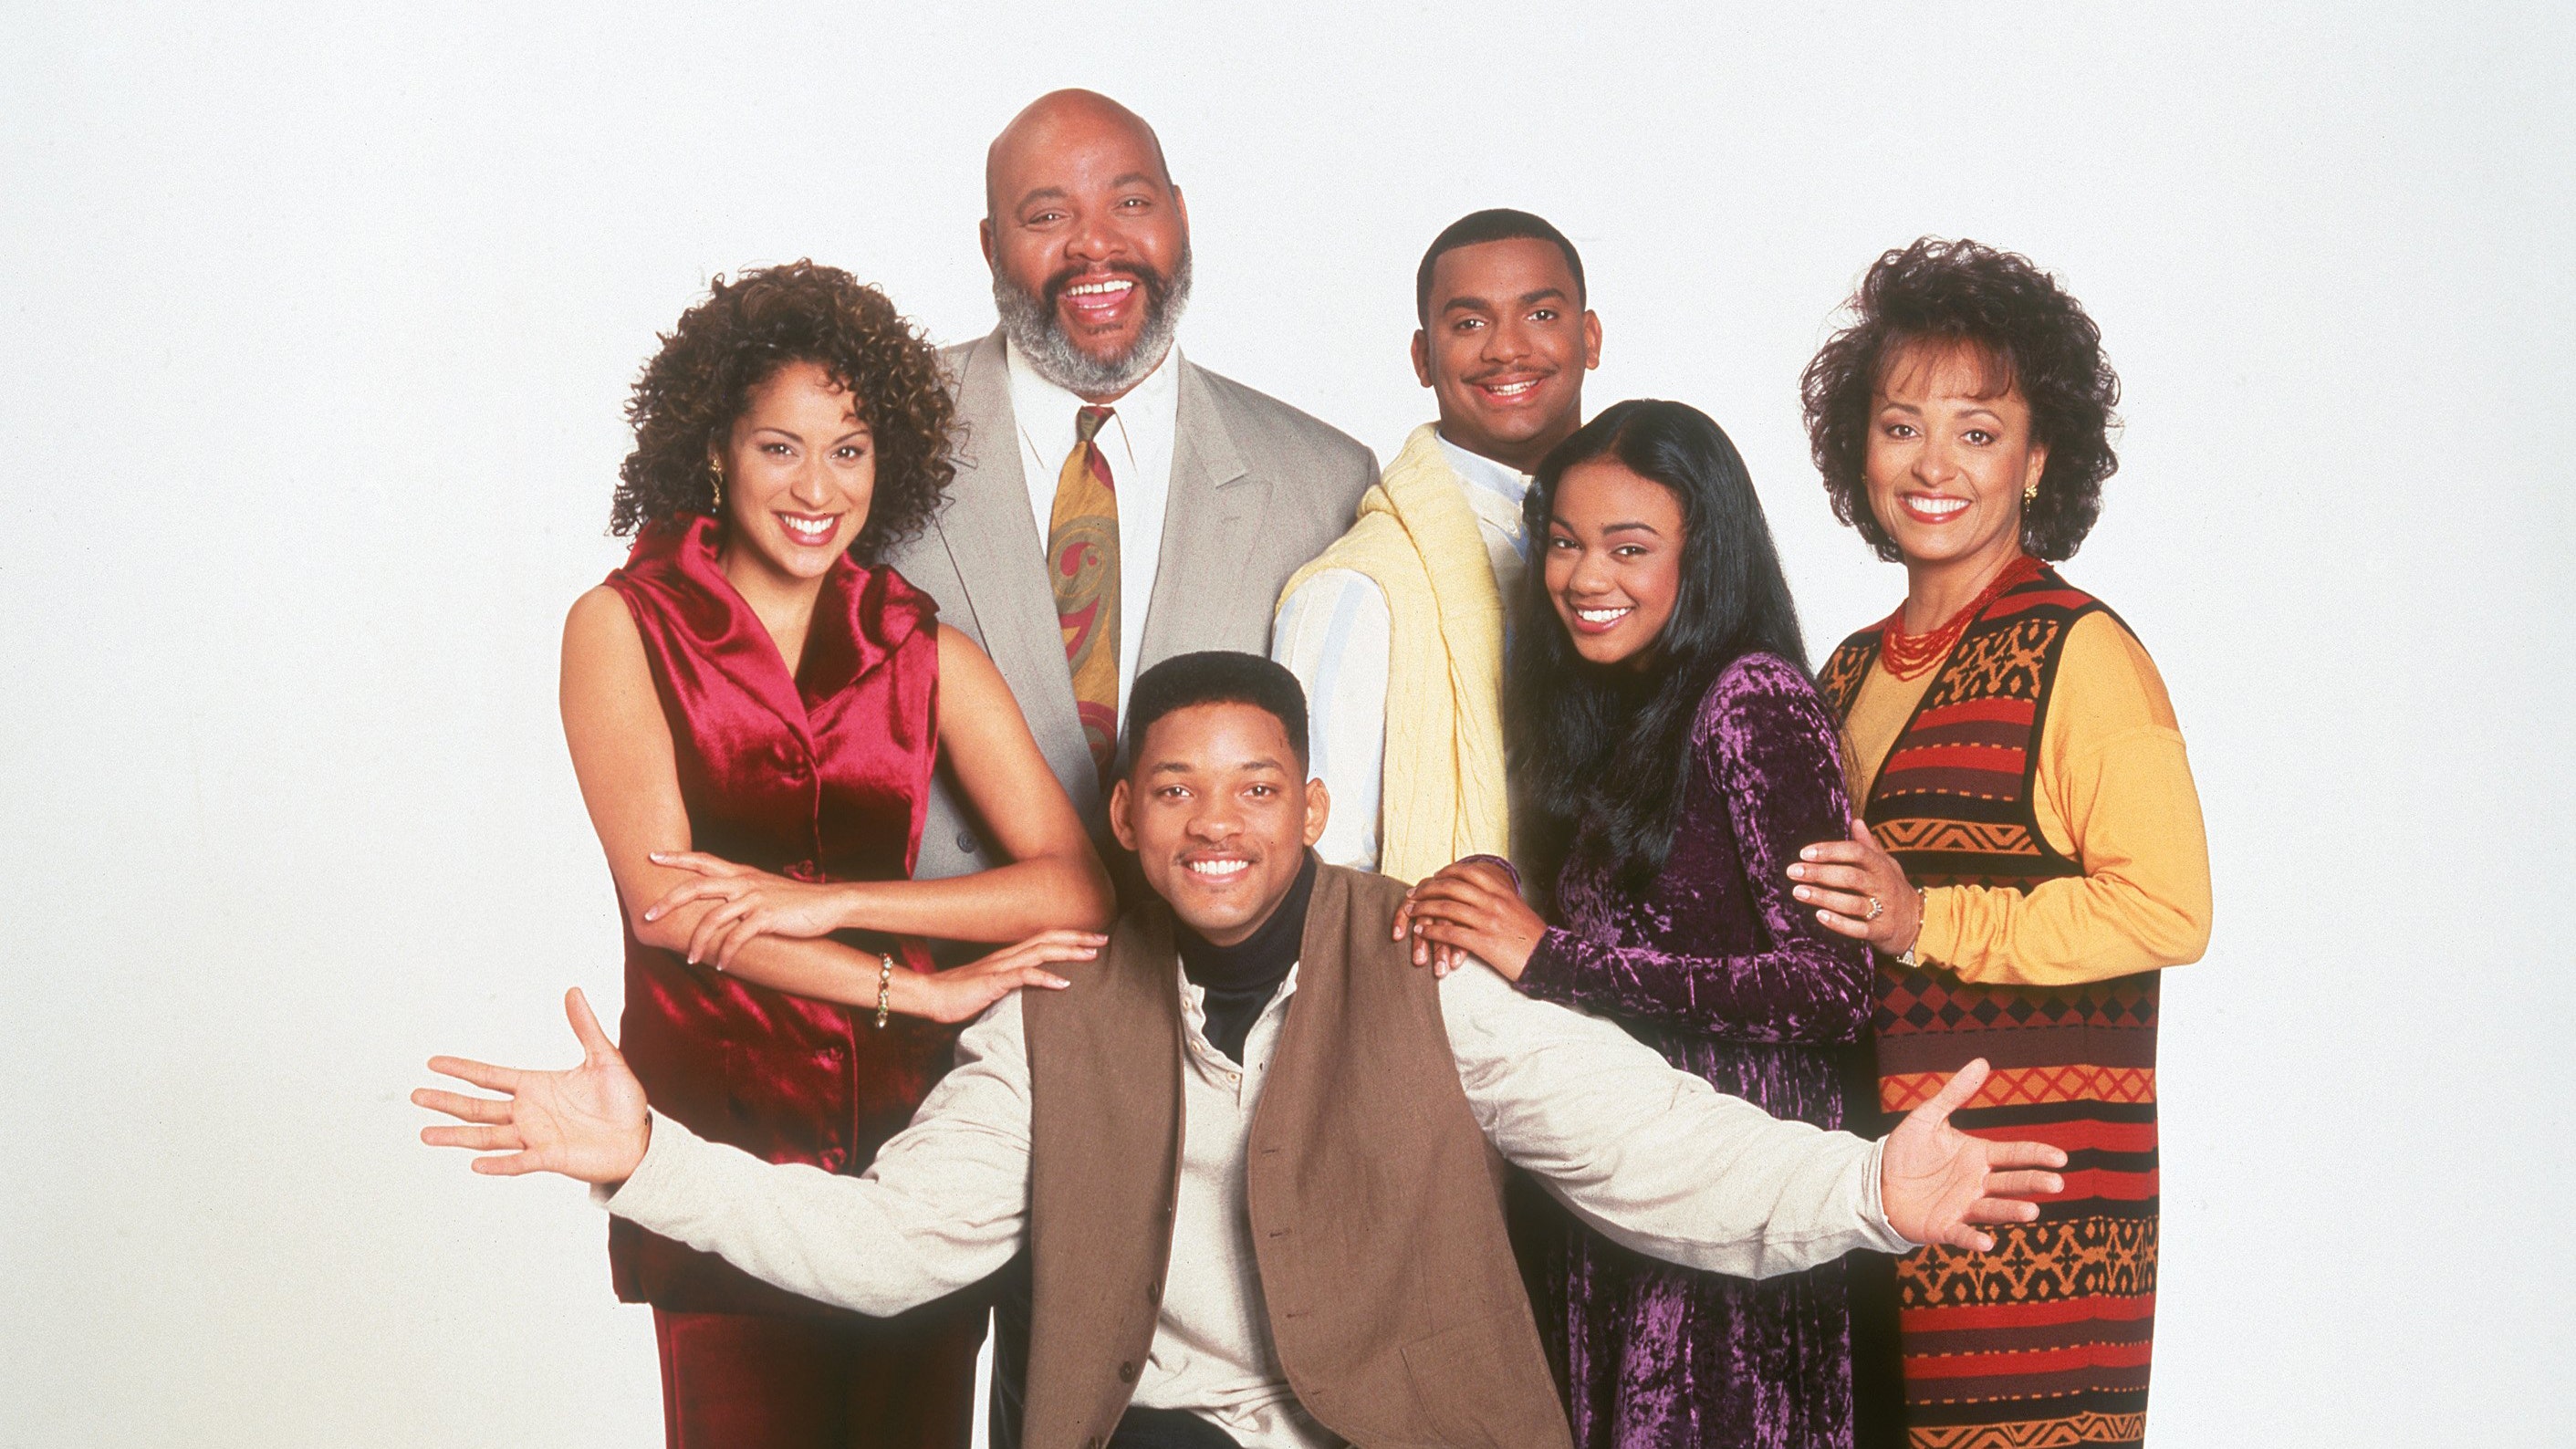 Will Smith shares 'Fresh Prince of Bel-Air' reunion trailer